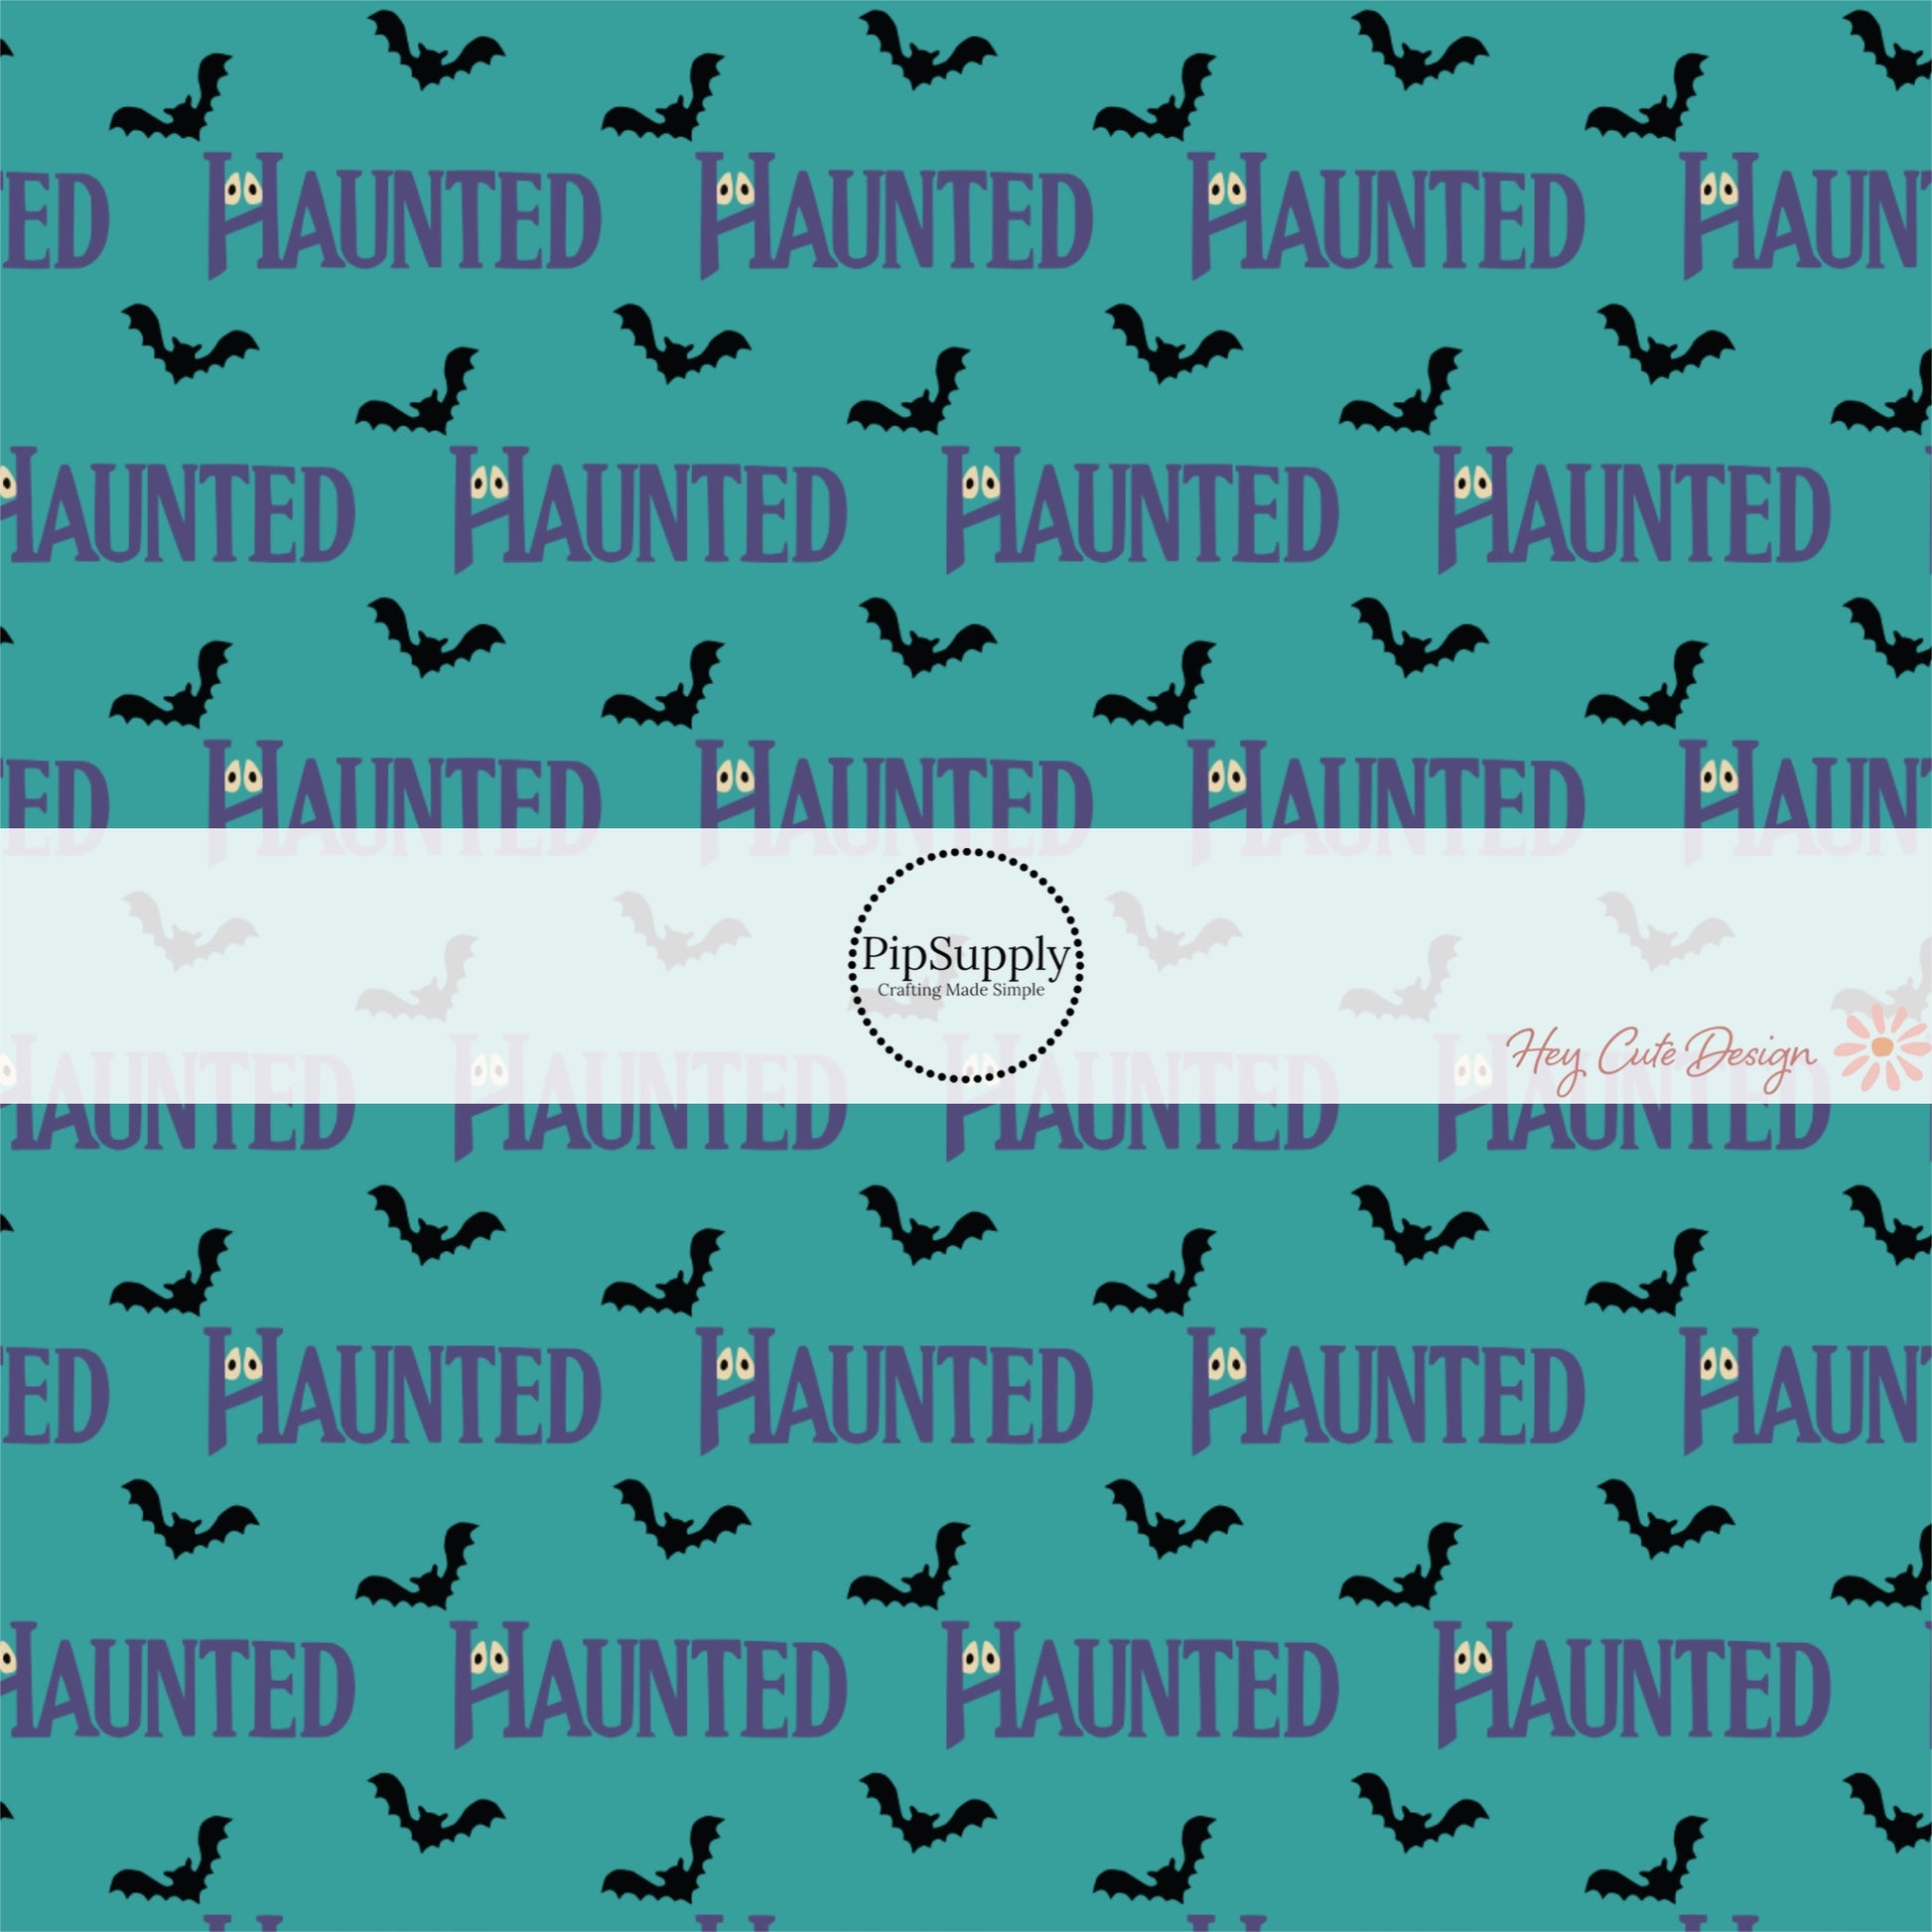 Teal Blue fabric by the yard with phrase "Haunted" and black flying bats.